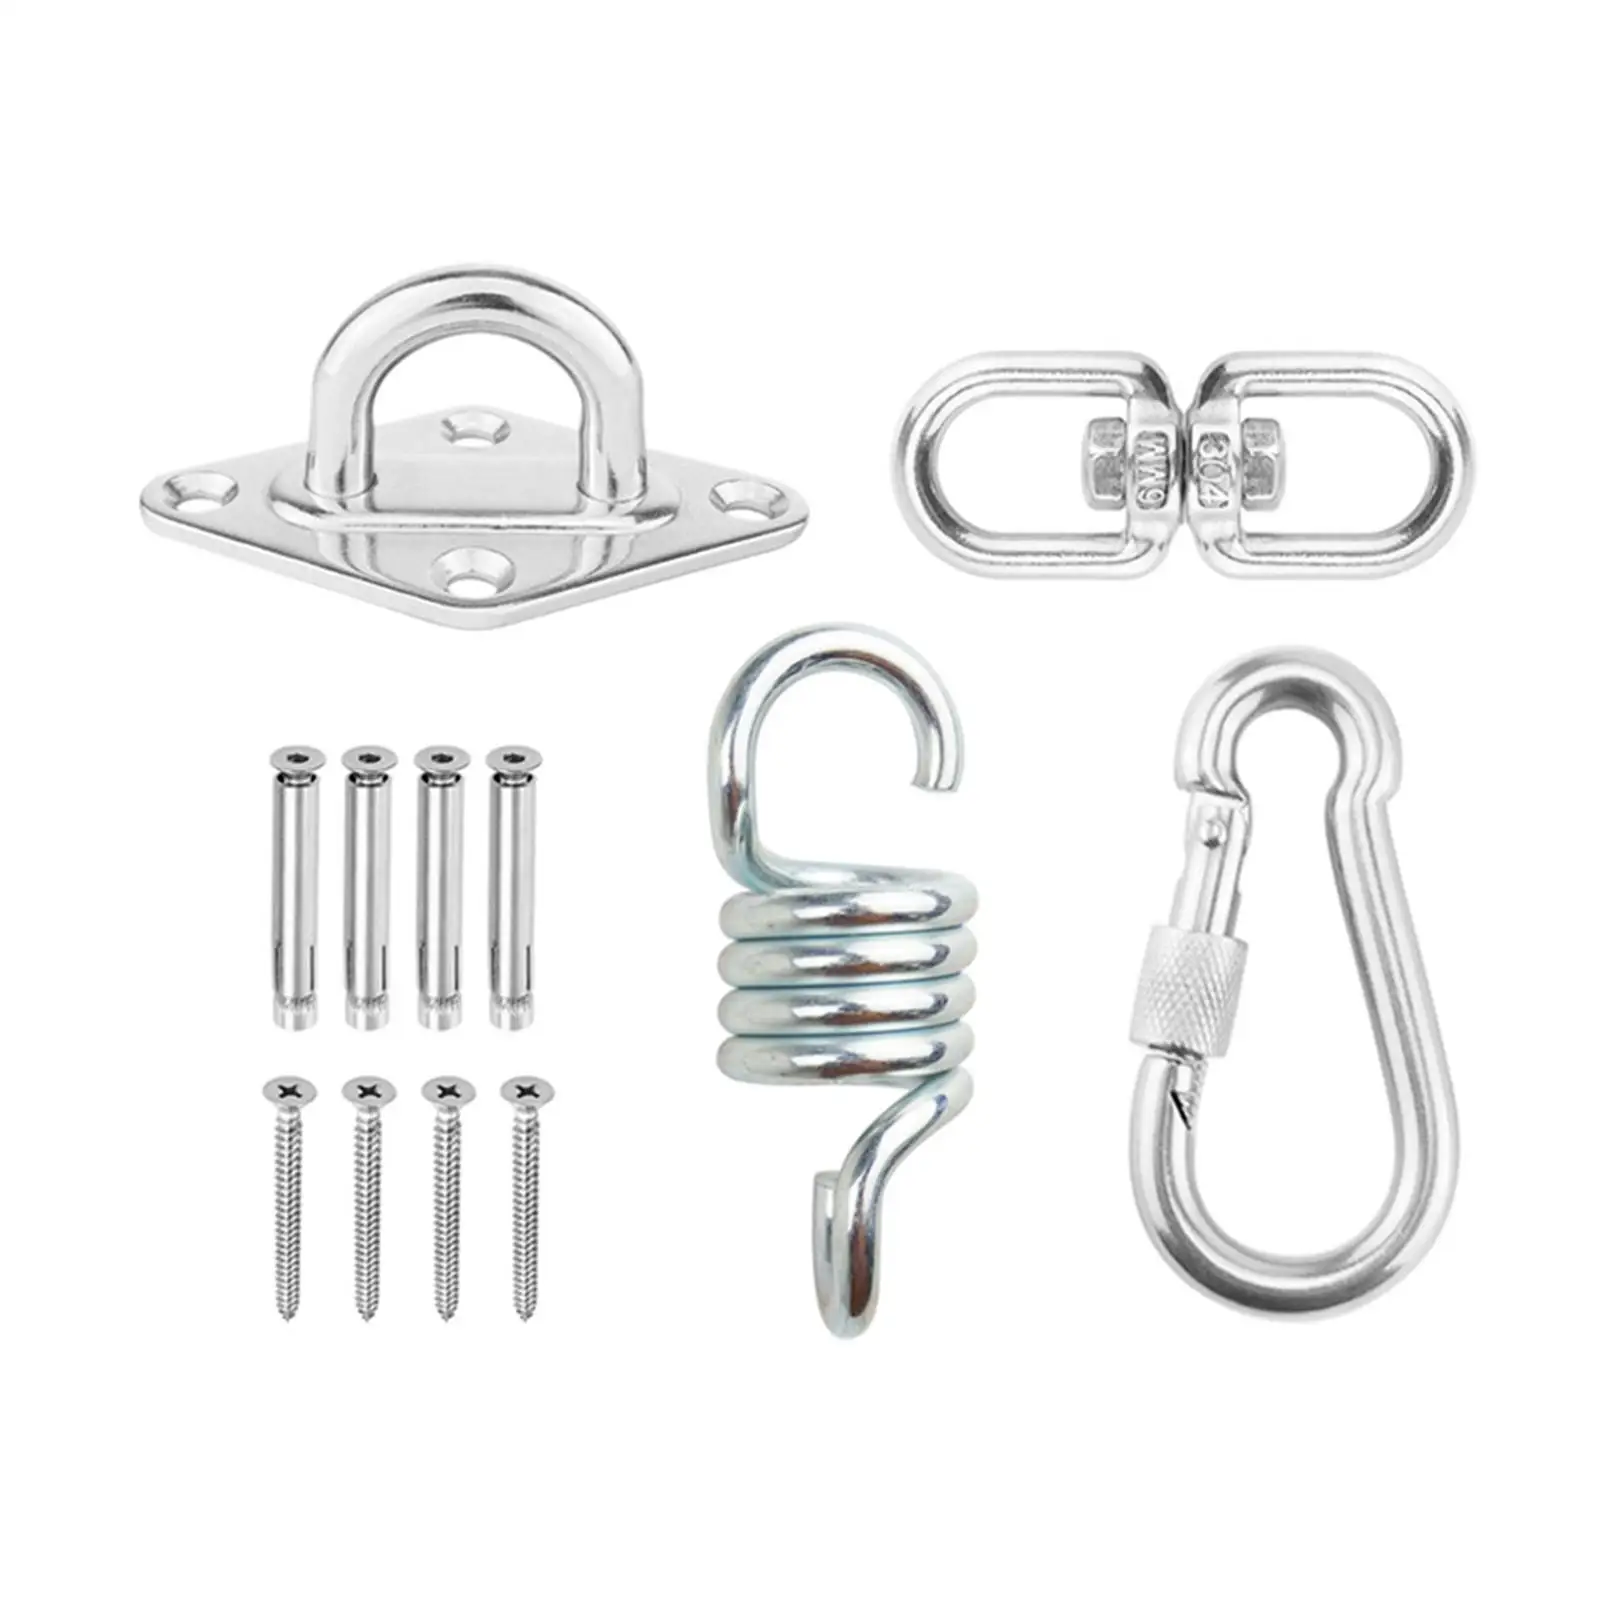 Hammock Chair Hanging Kit Stainless Steel for Swing, Chair, Yoga Exercise Easily Install Load Capacity 500lb Ceiling Hook Hanger